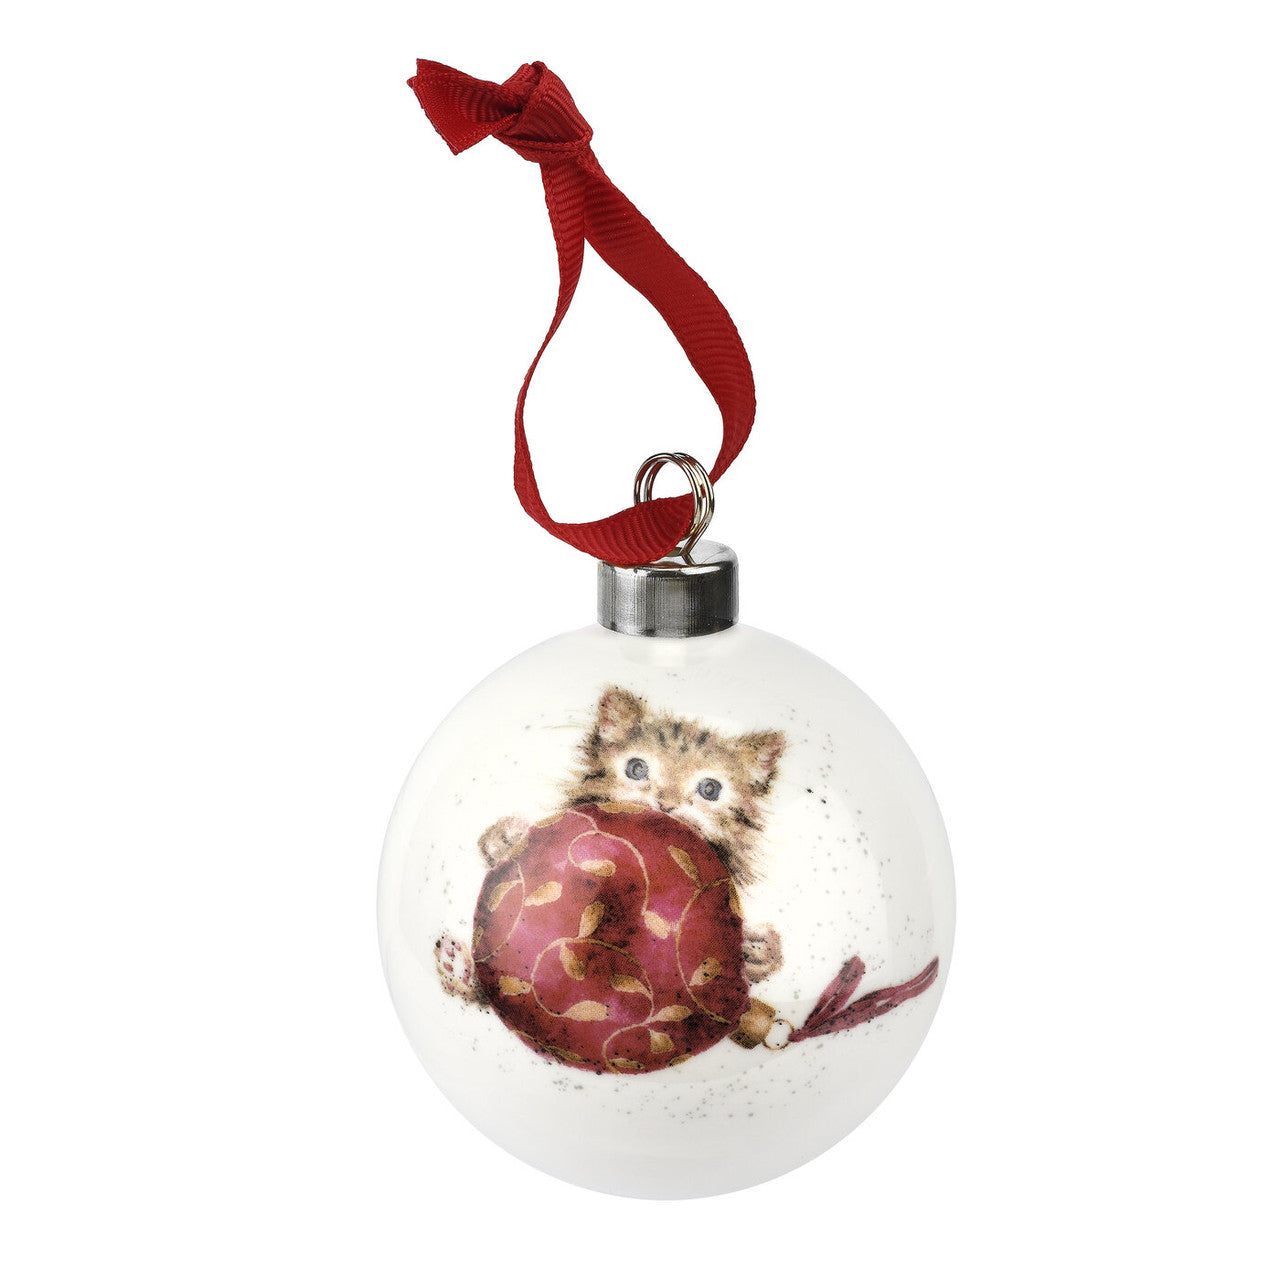 'Purrfect Christmas' Fine Bone China rabbit bauble from Wrendale Designs and Portmeirion